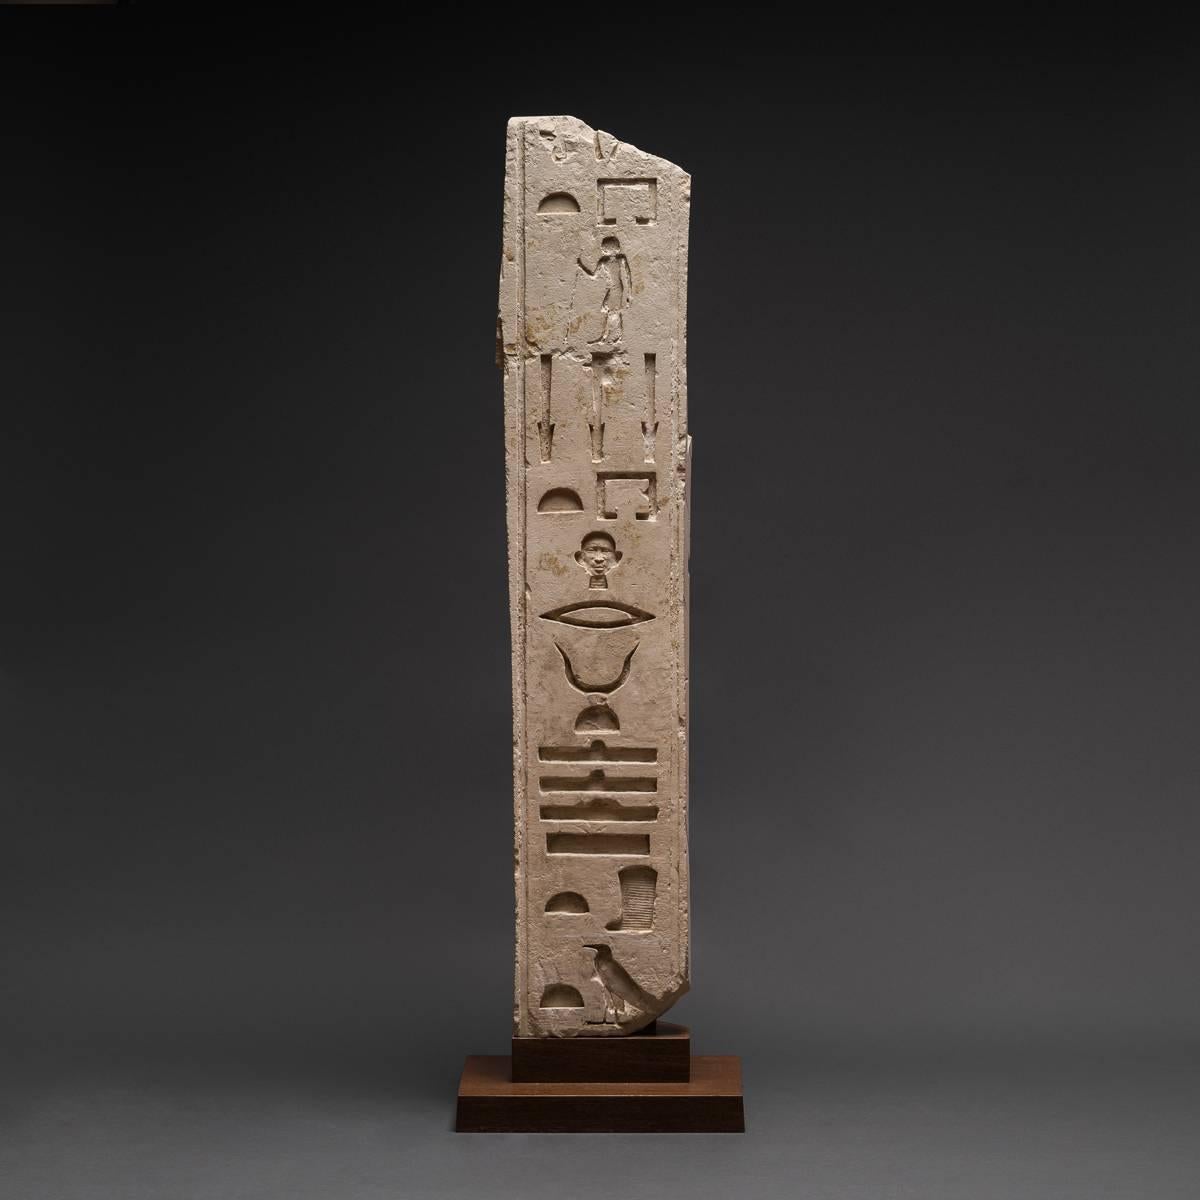 Sculpted in classically-designed sunken hieroglyphs, this single column of inscription, oriented to the left, contains a partial string of titles belonging to the cursus honorum of a highly placed official in pharaoh’s court. The inscription as